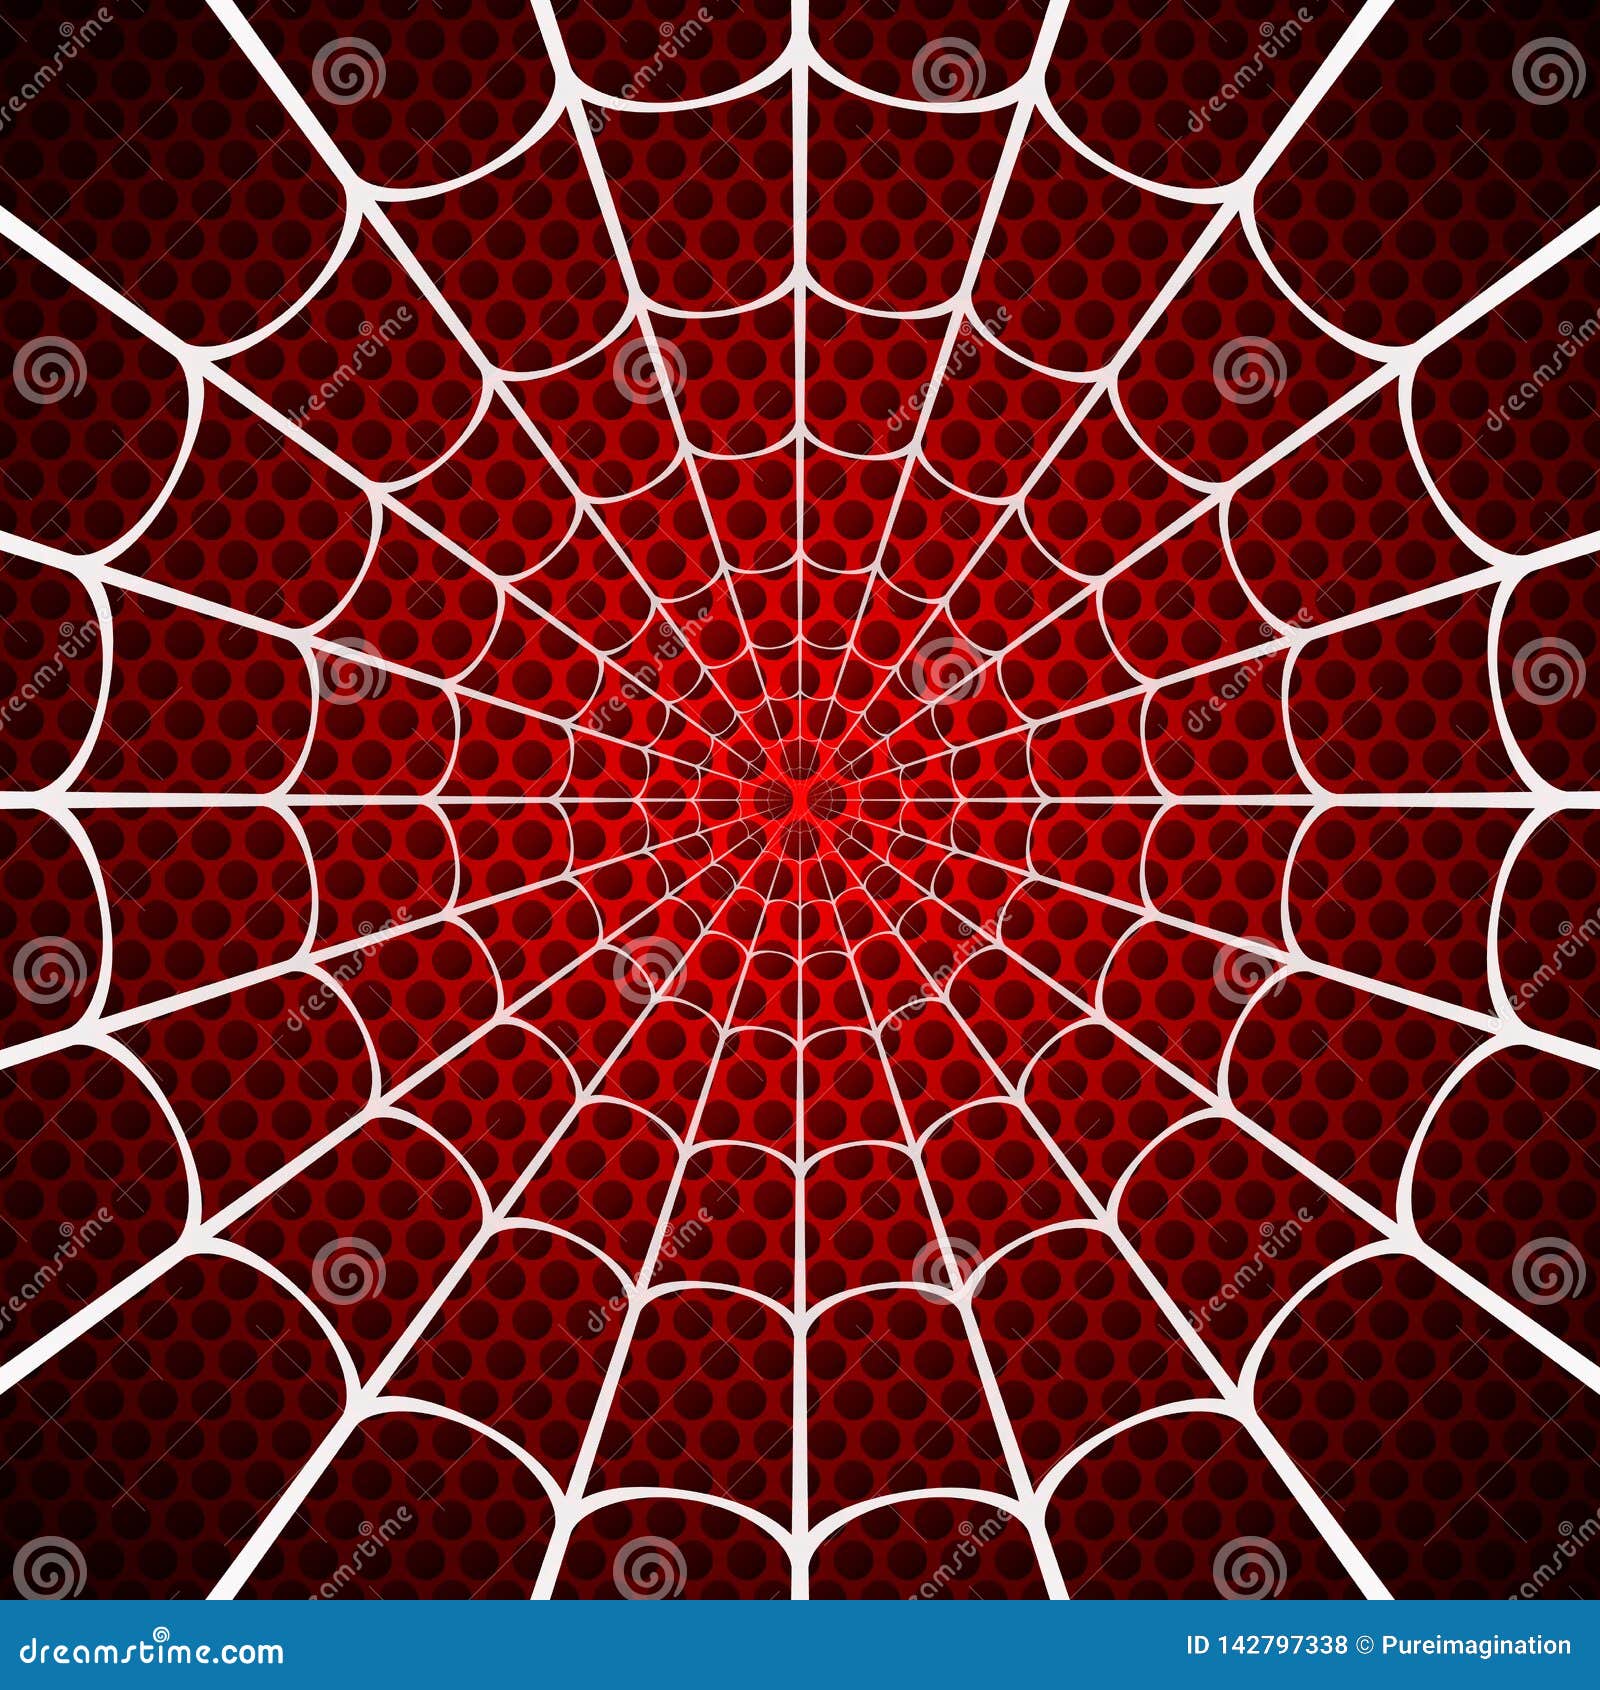 White Spider Web On Red Background Stock Vector Illustration Of Fear Geometric 142797338